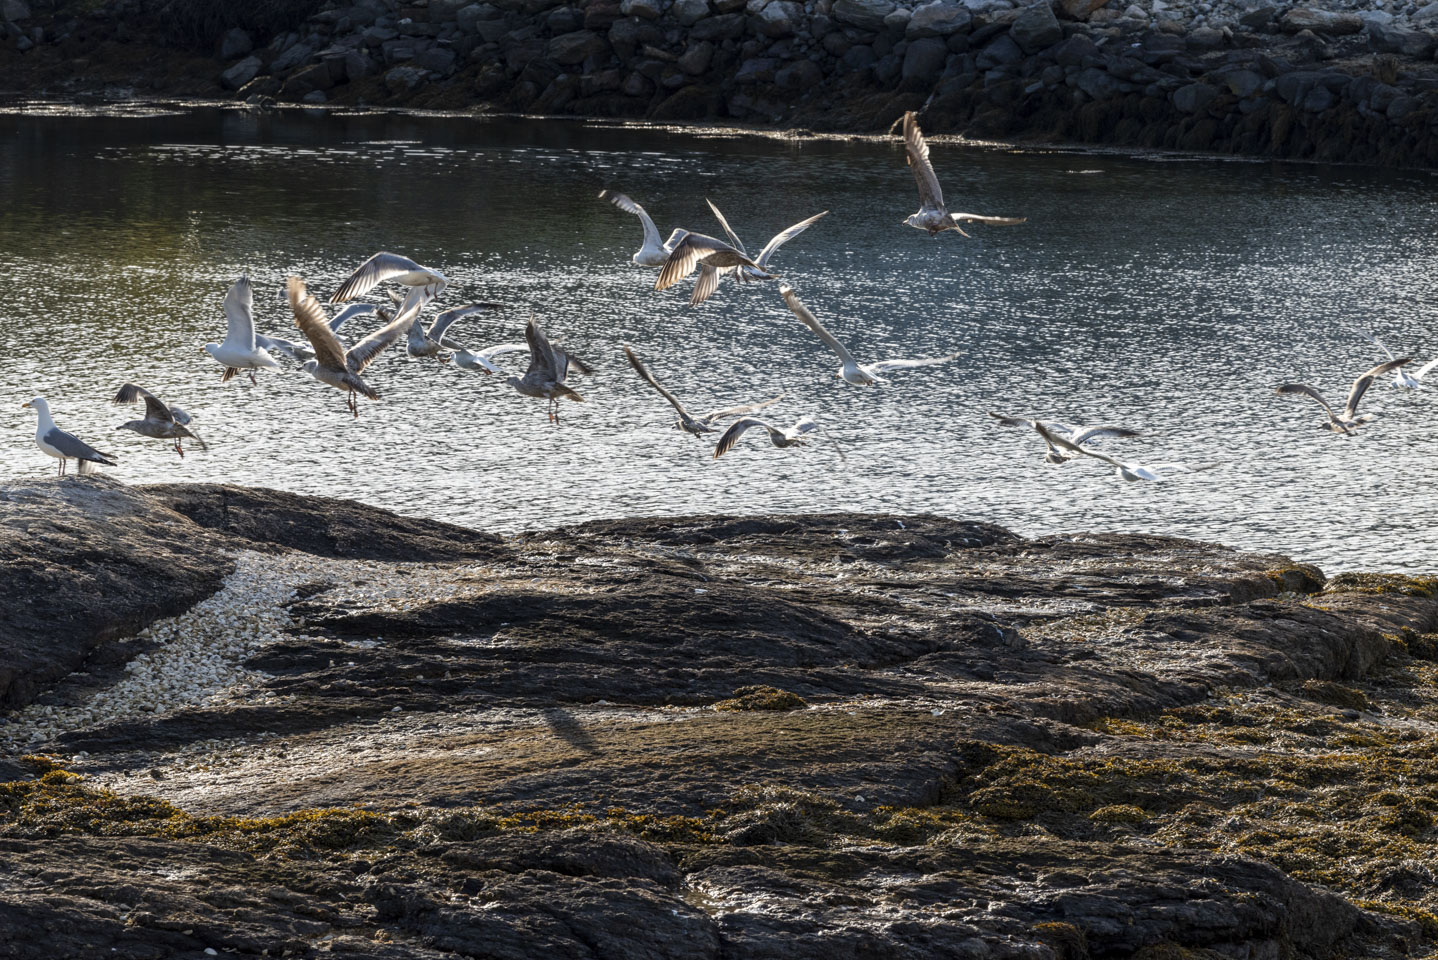 A flock of gulls taking off from a rock